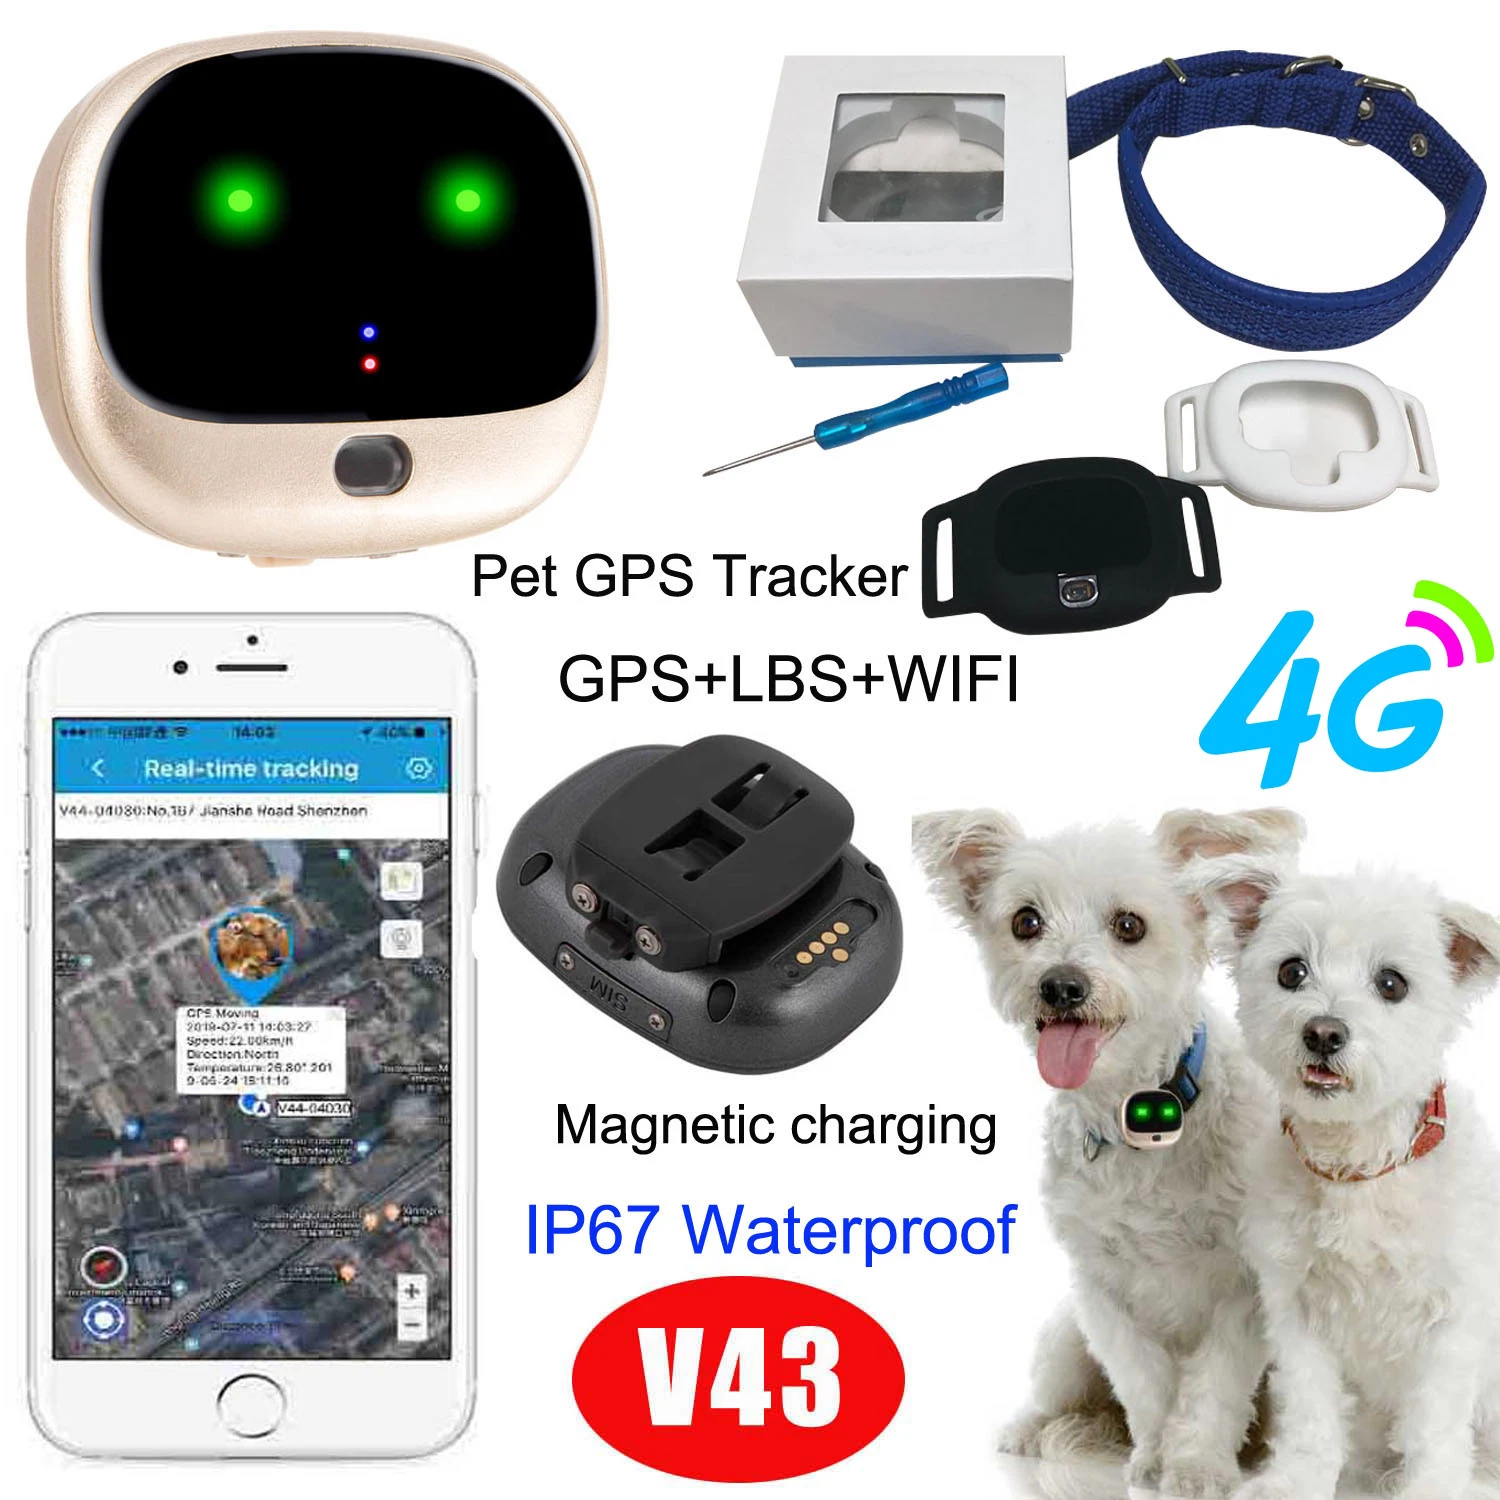 Newest 4G IP67 Waterproof Small Real-Time Tracking Device Pet GPS Tracker for Dogs Cats with Anti Lost Alarm V43